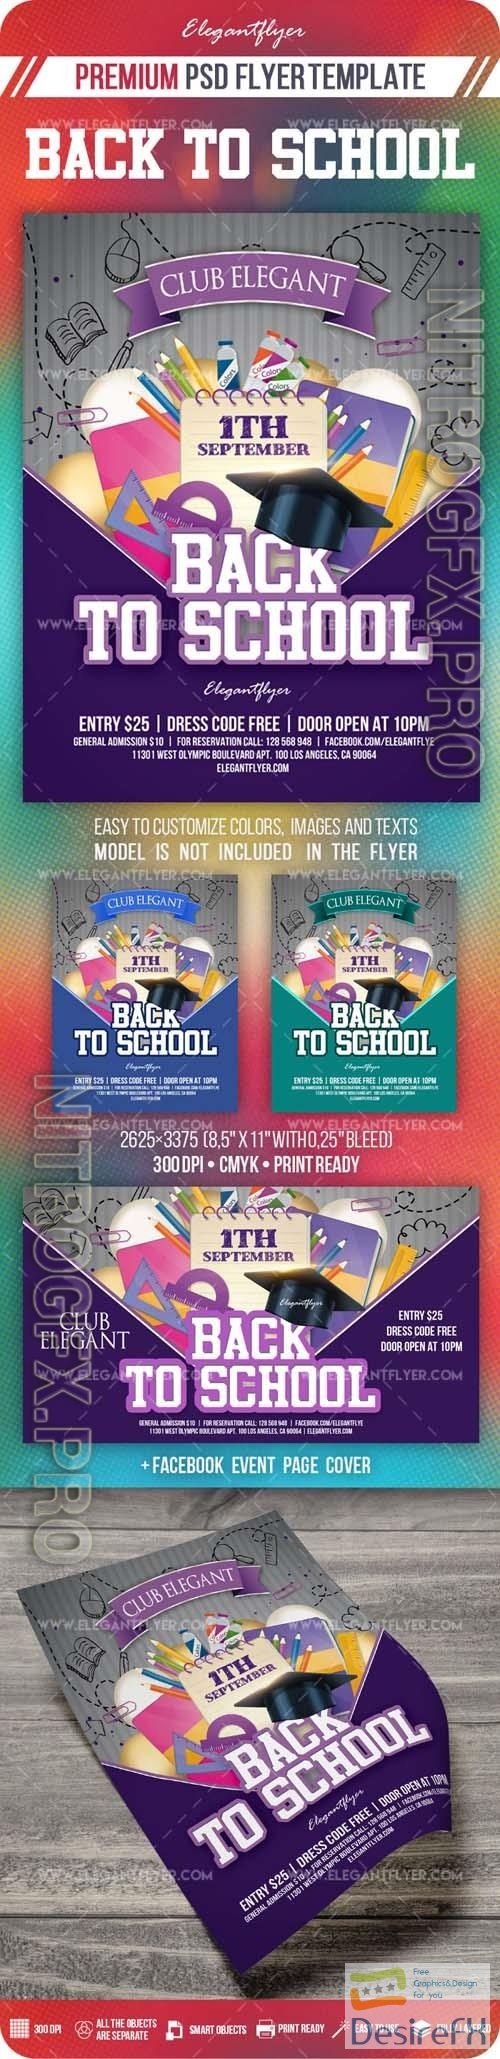 Back to School Flyer PSD Template